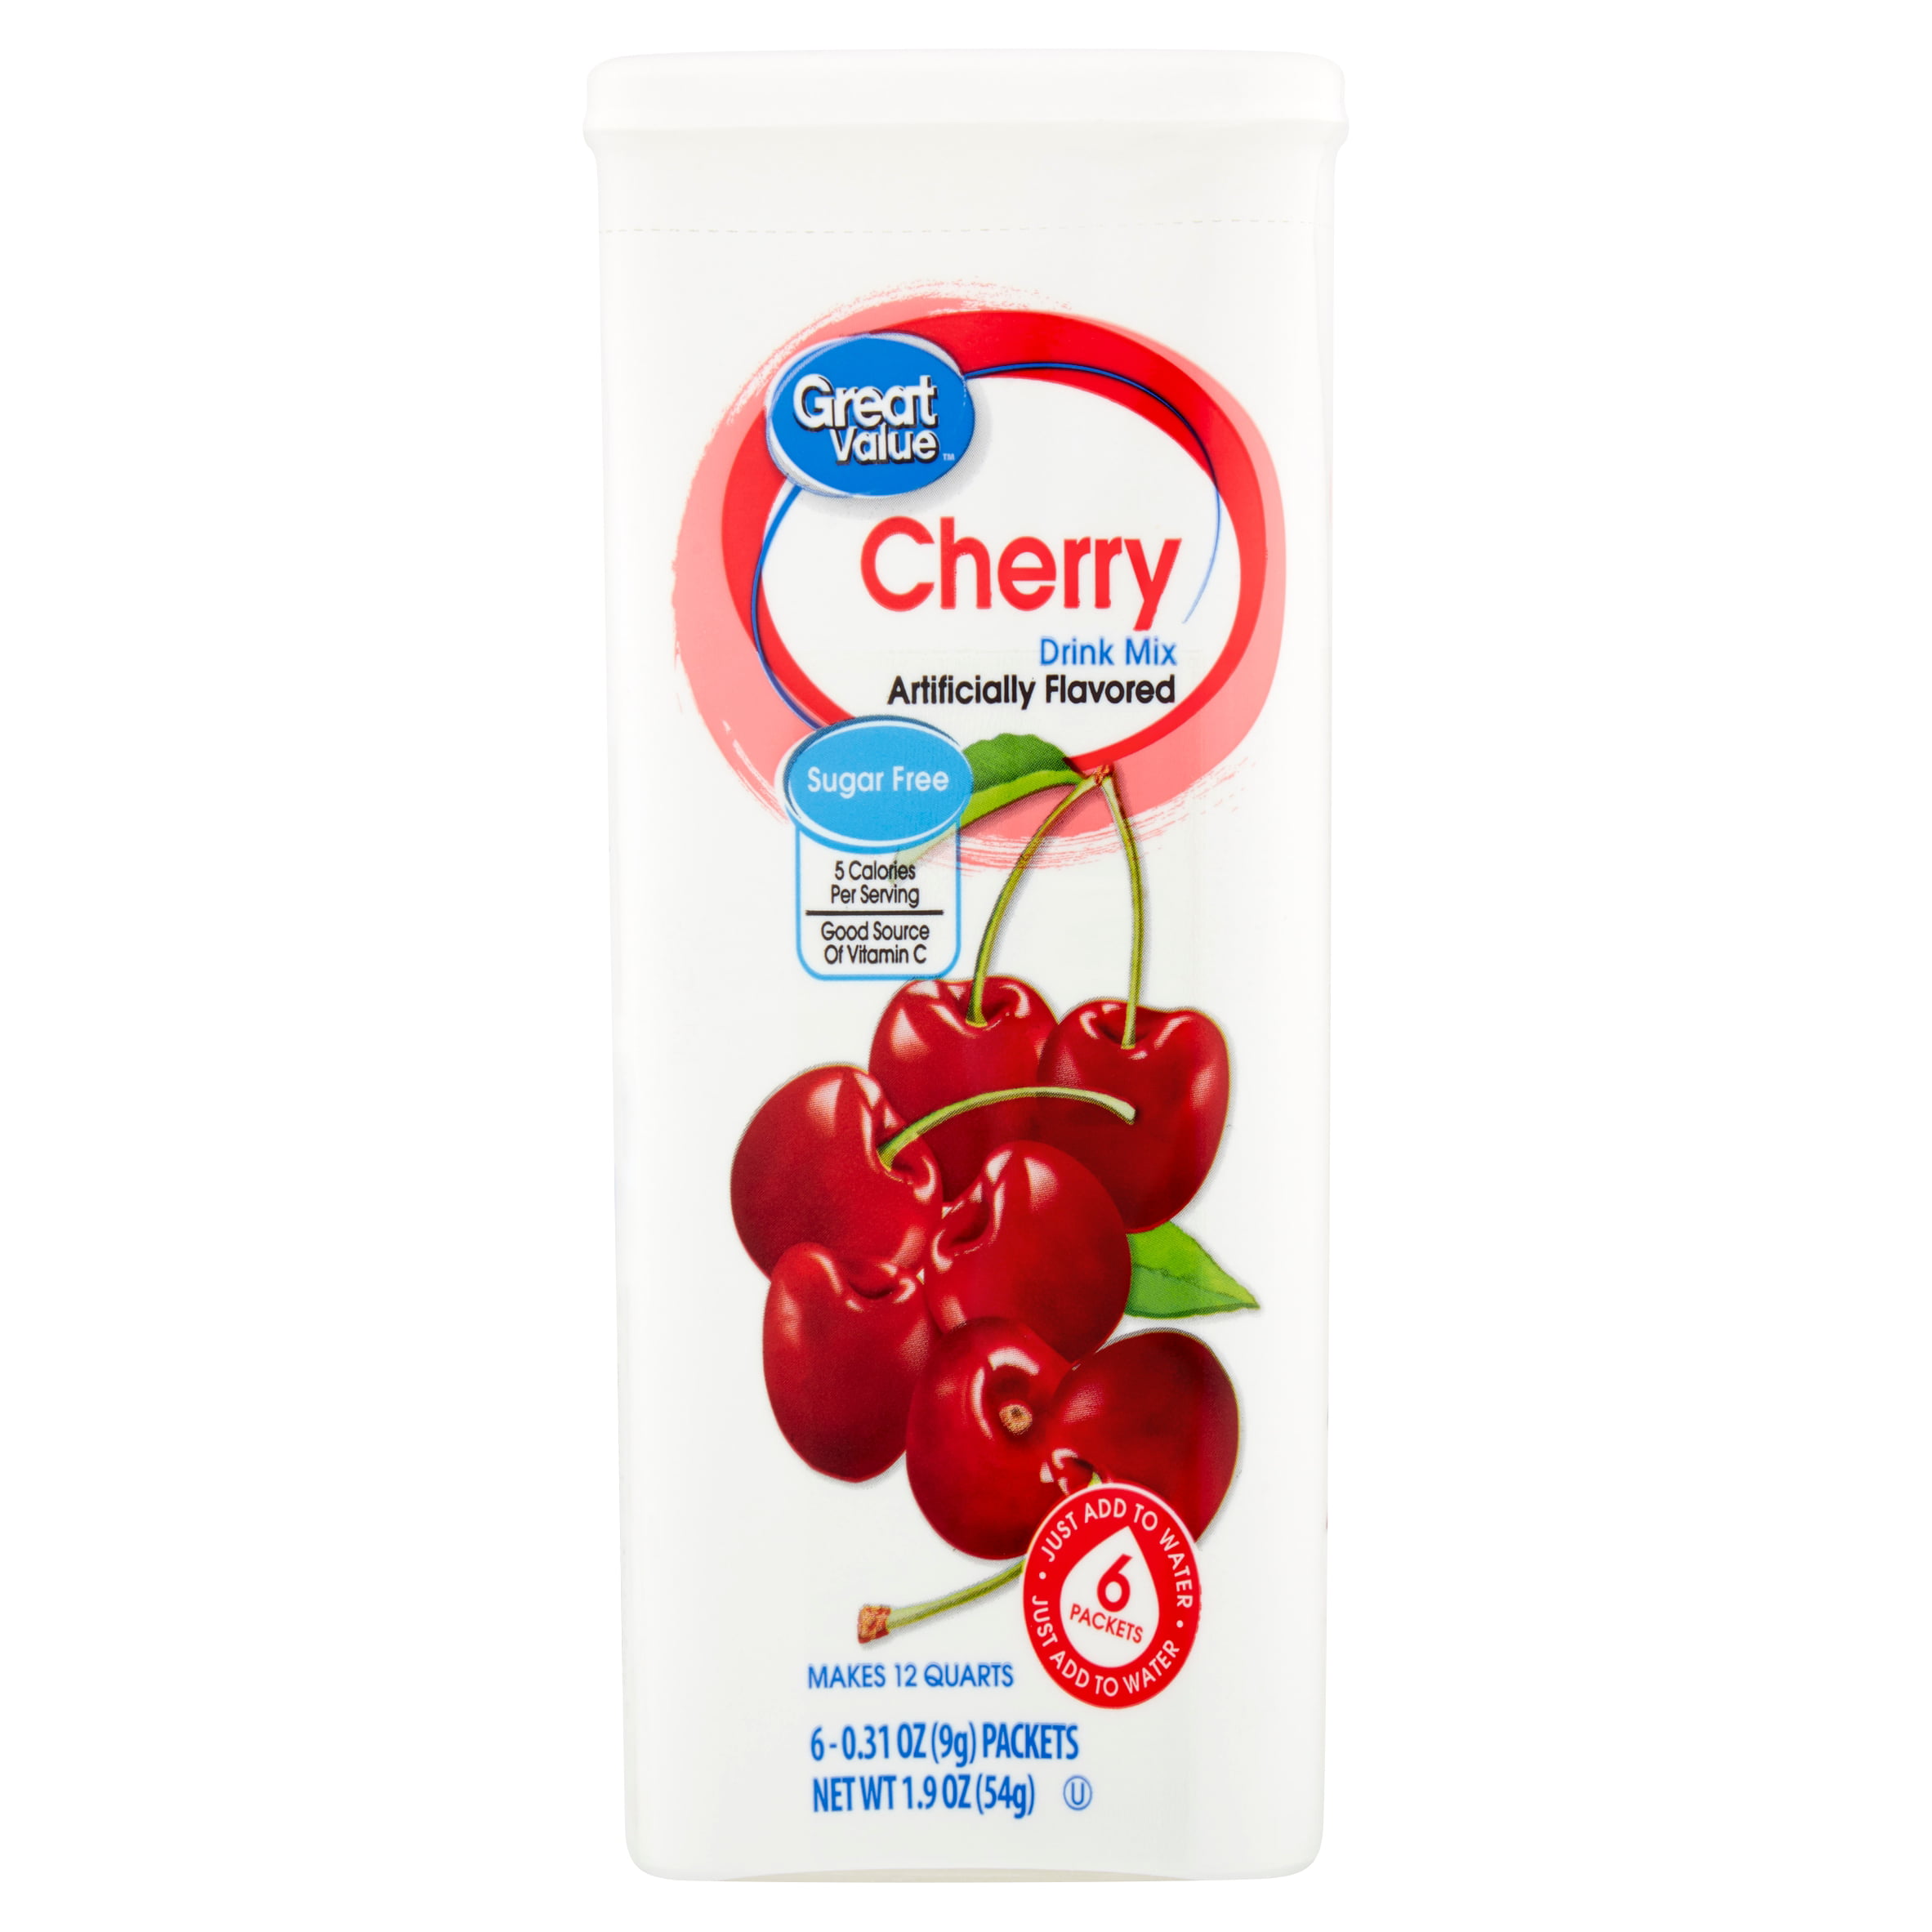 (3 pack) (18 Packets) Great Value Cherry Sugar-Free Drink Mix